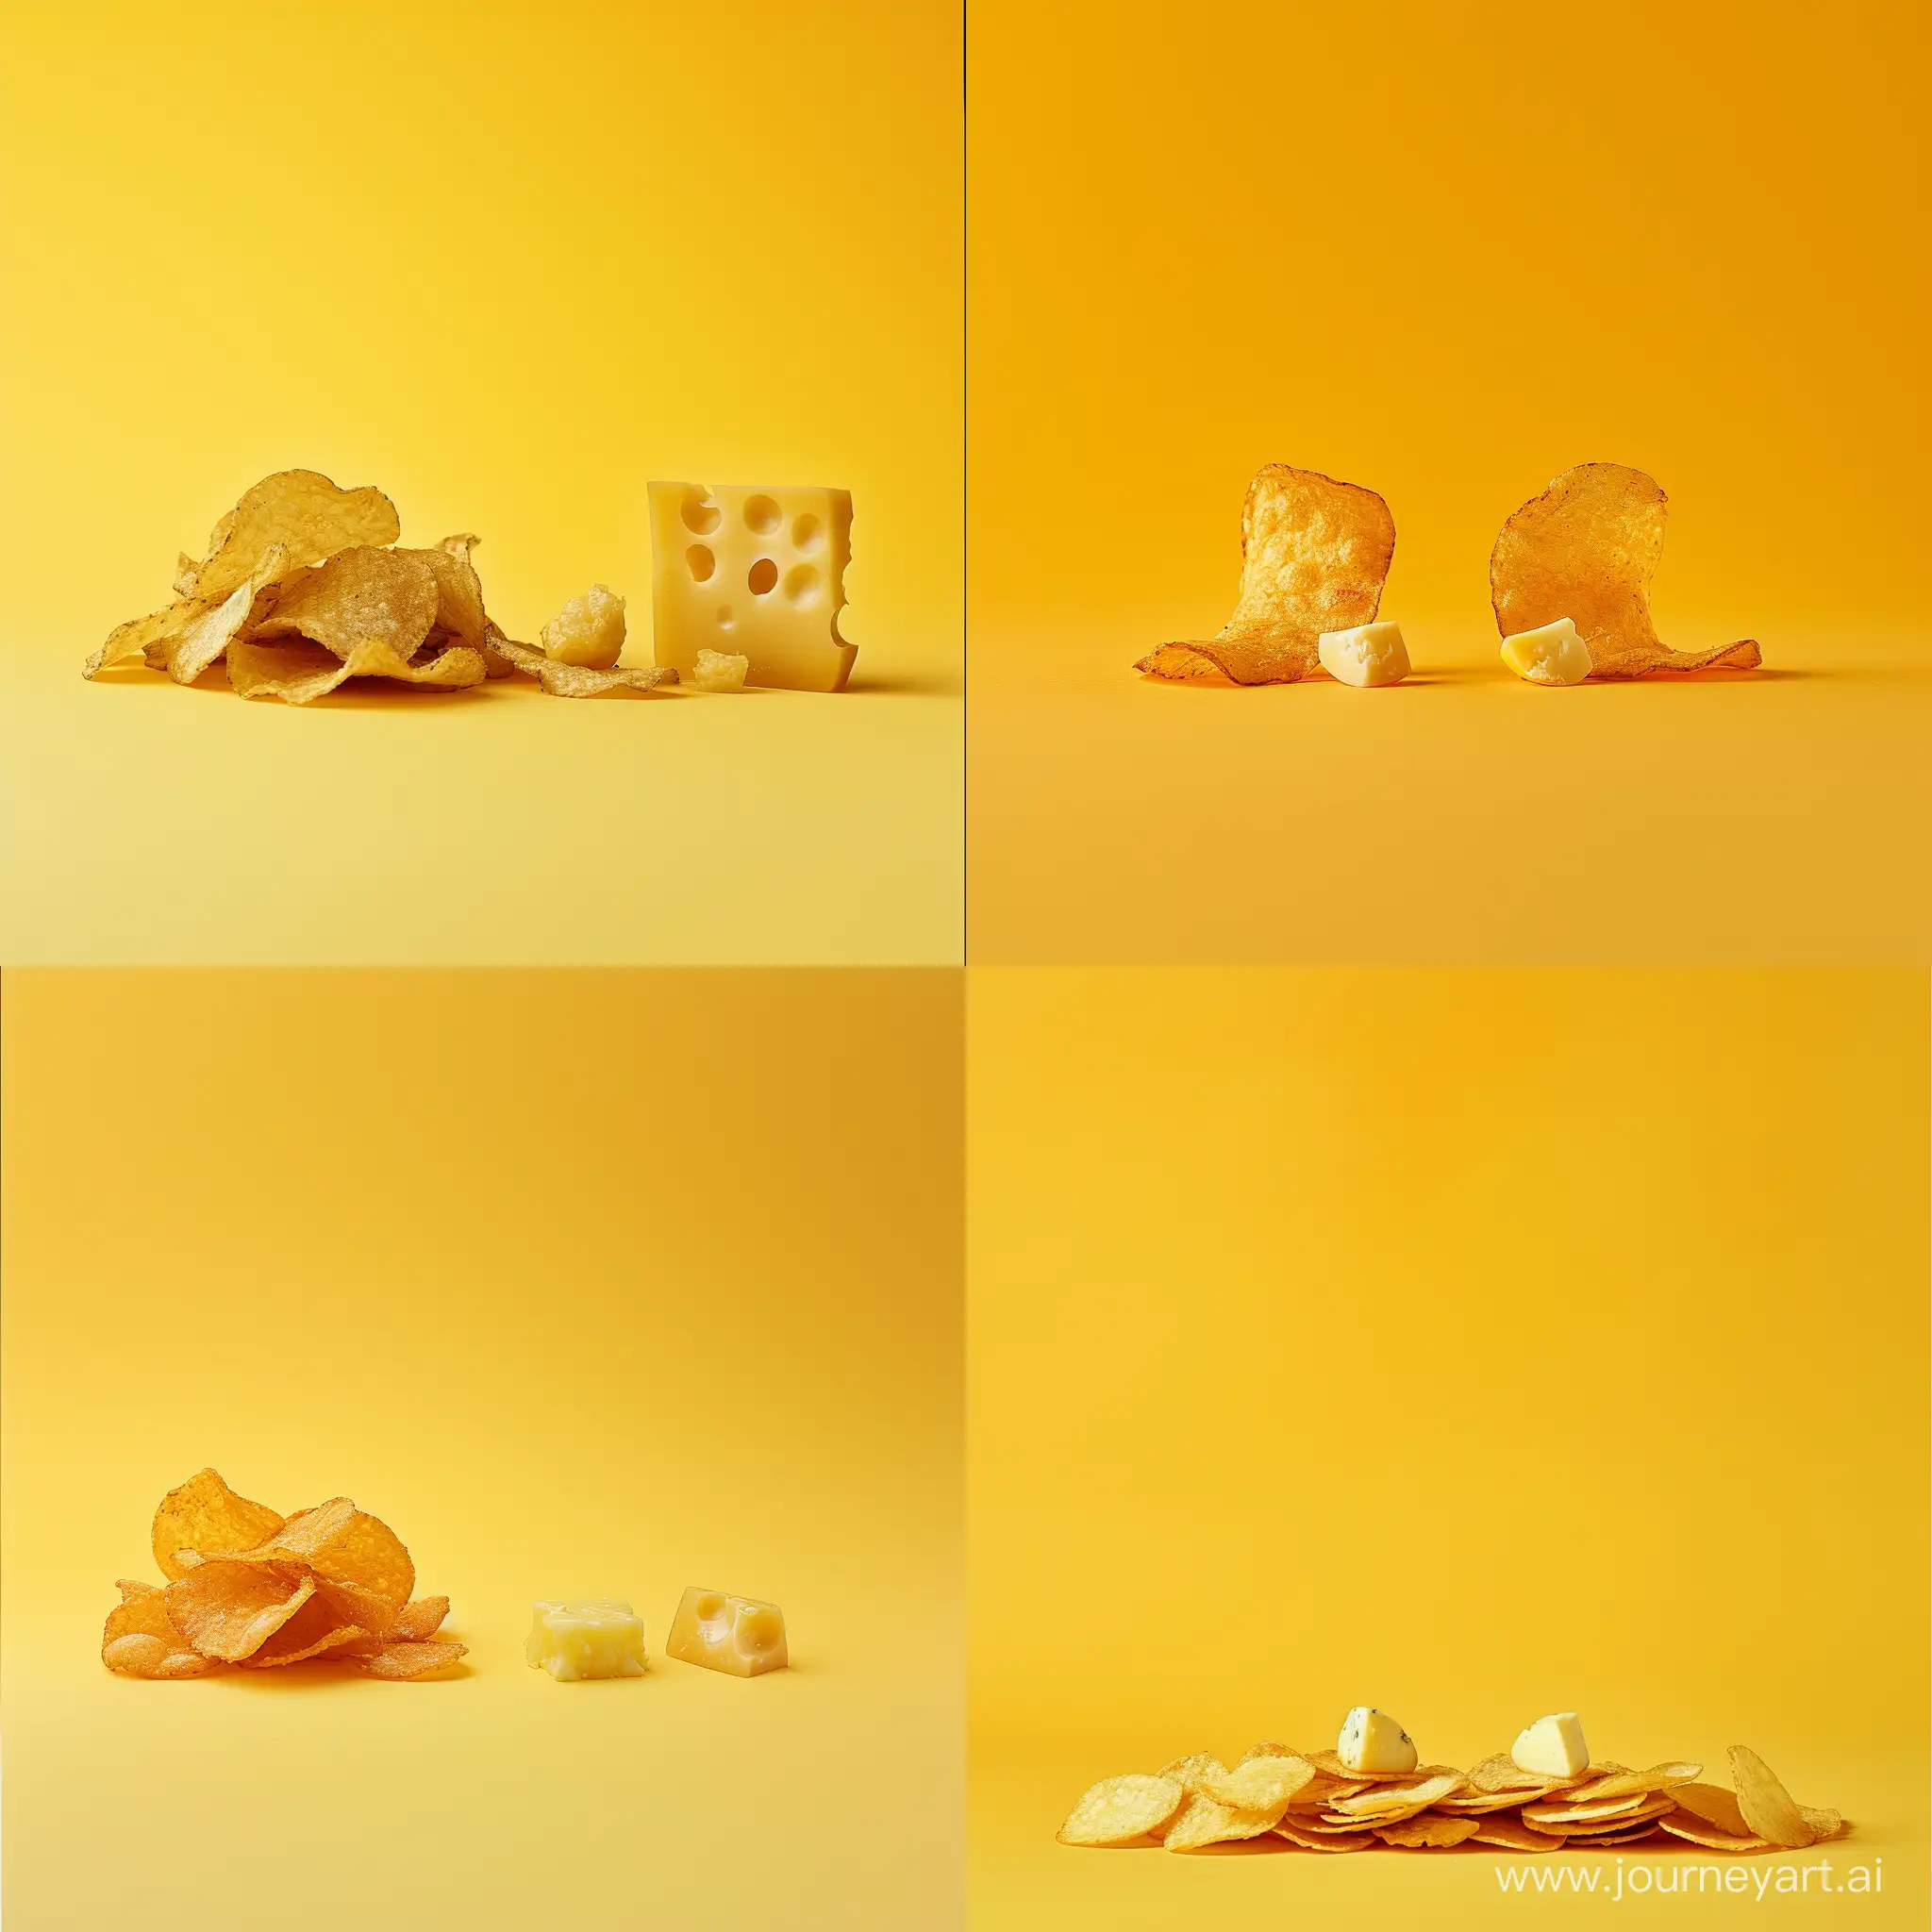 Savory-Chips-and-Cheese-Arrangement-Studioshot-Culinary-Photography-on-Vibrant-Yellow-Background